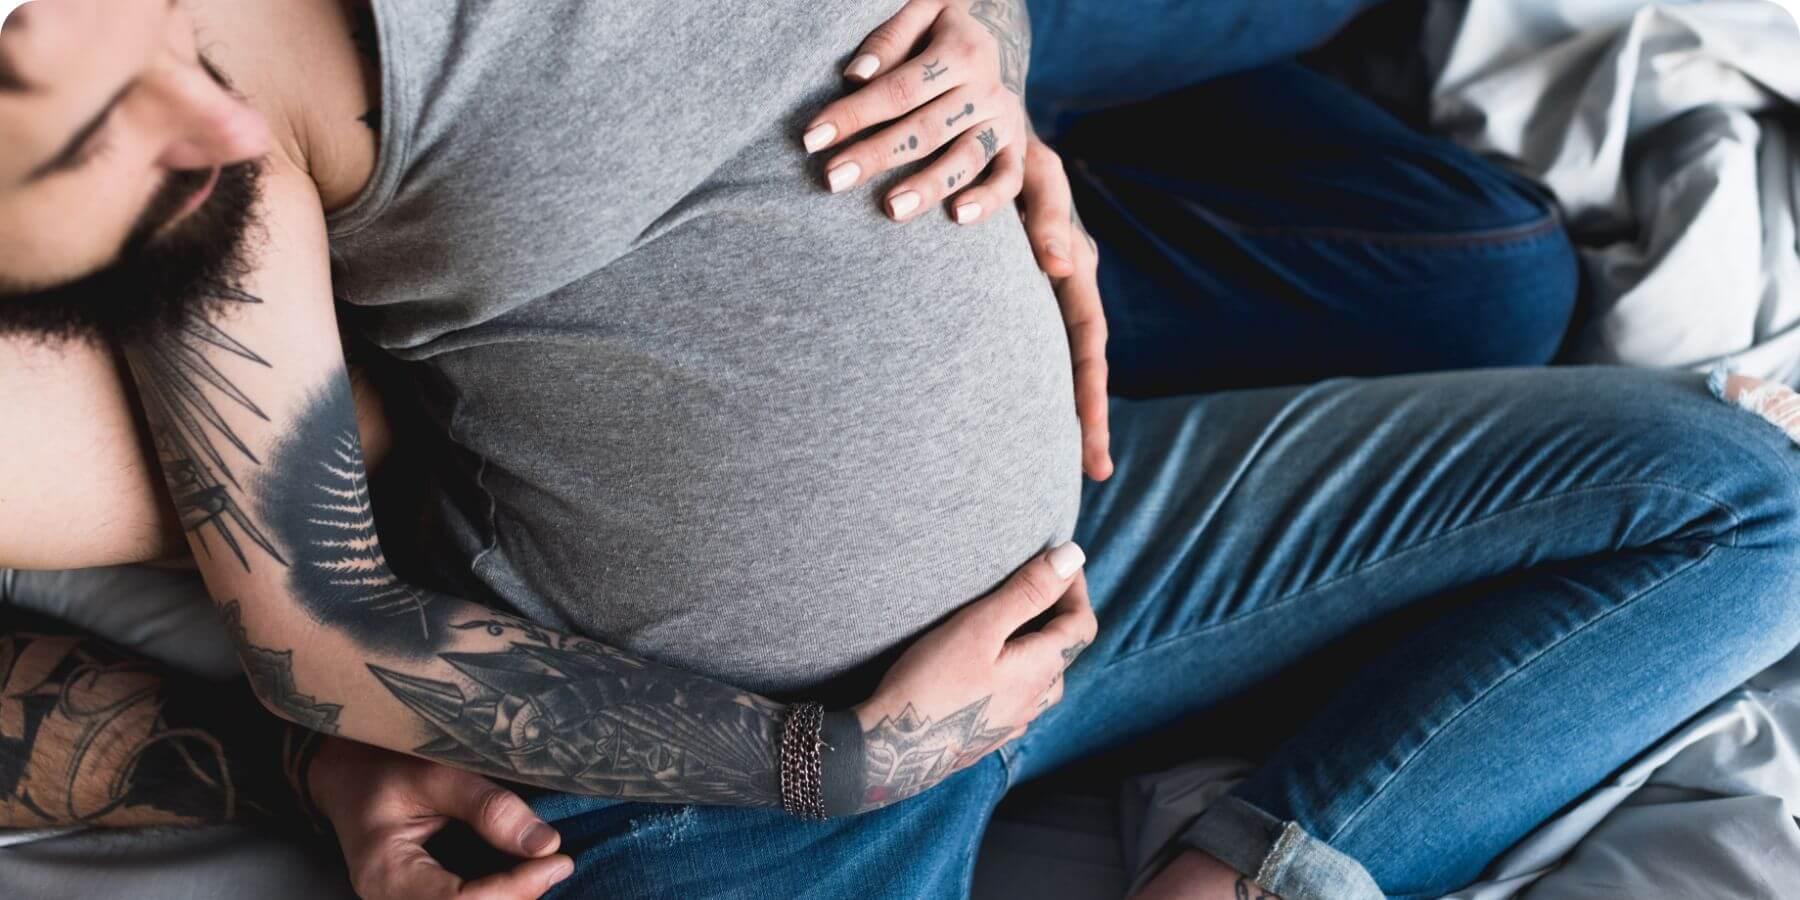 Can You Get a Tattoo While Pregnant What to Know and Safety Tips